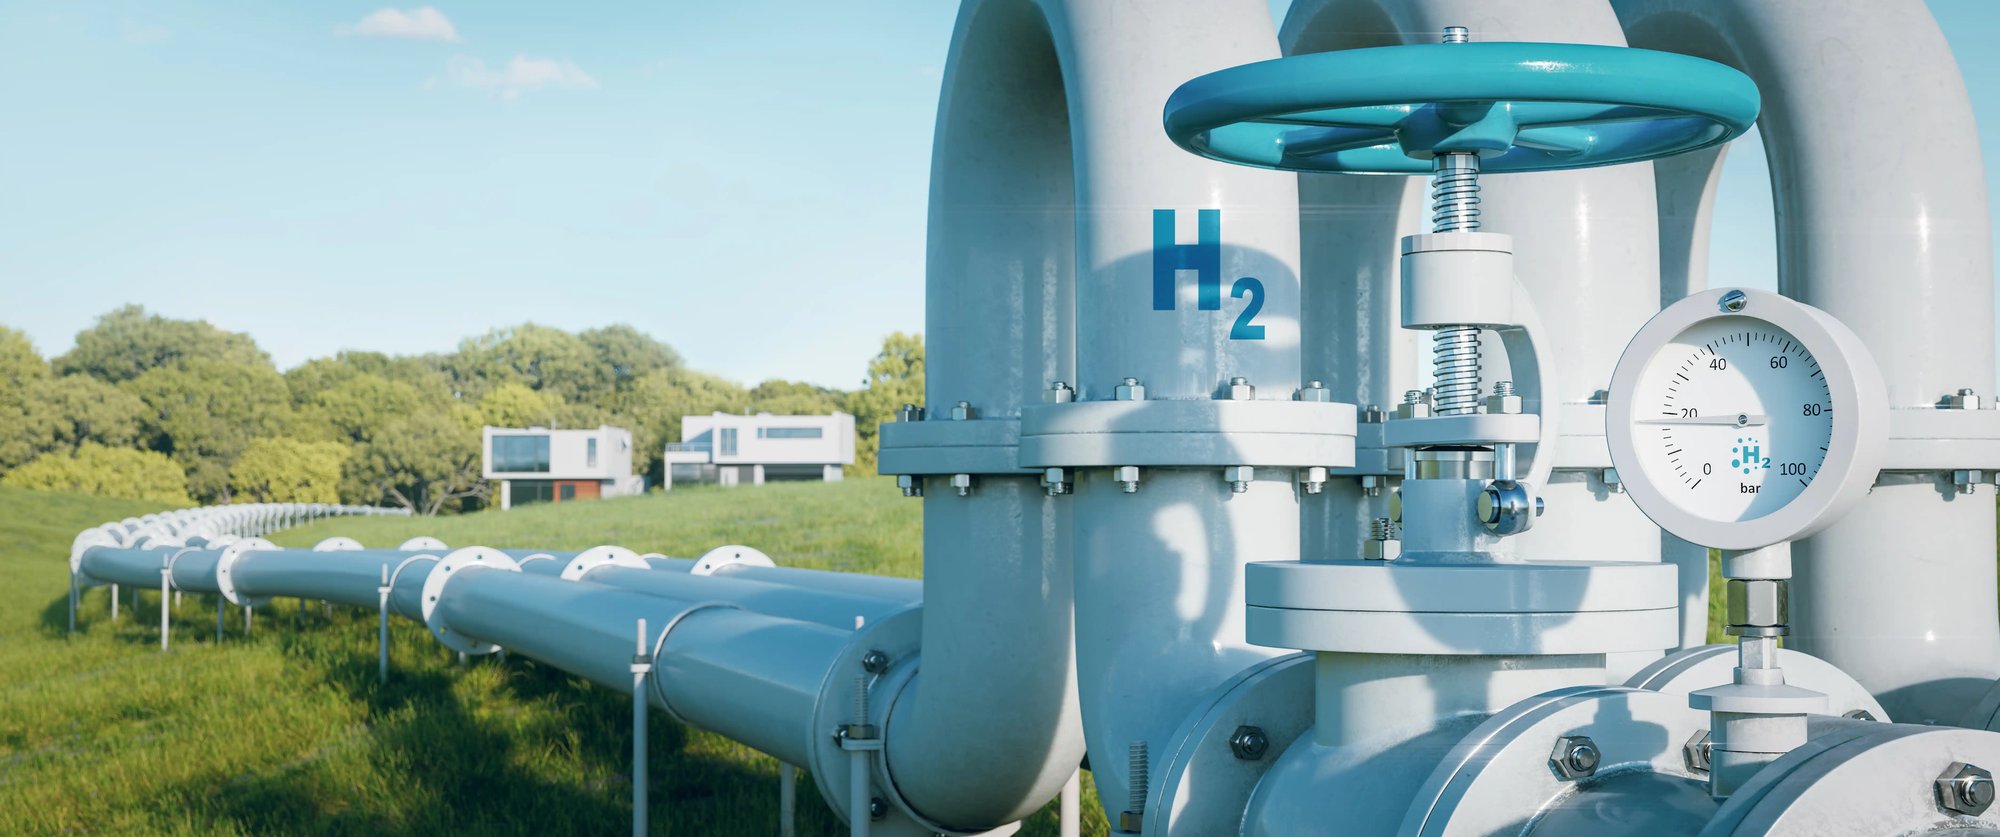 A hydrogen pipeline to houses illustrating the transformation of the energy sector towards clean, carbon-neutral, safe and independent energy sources to replace natural gas in homes.